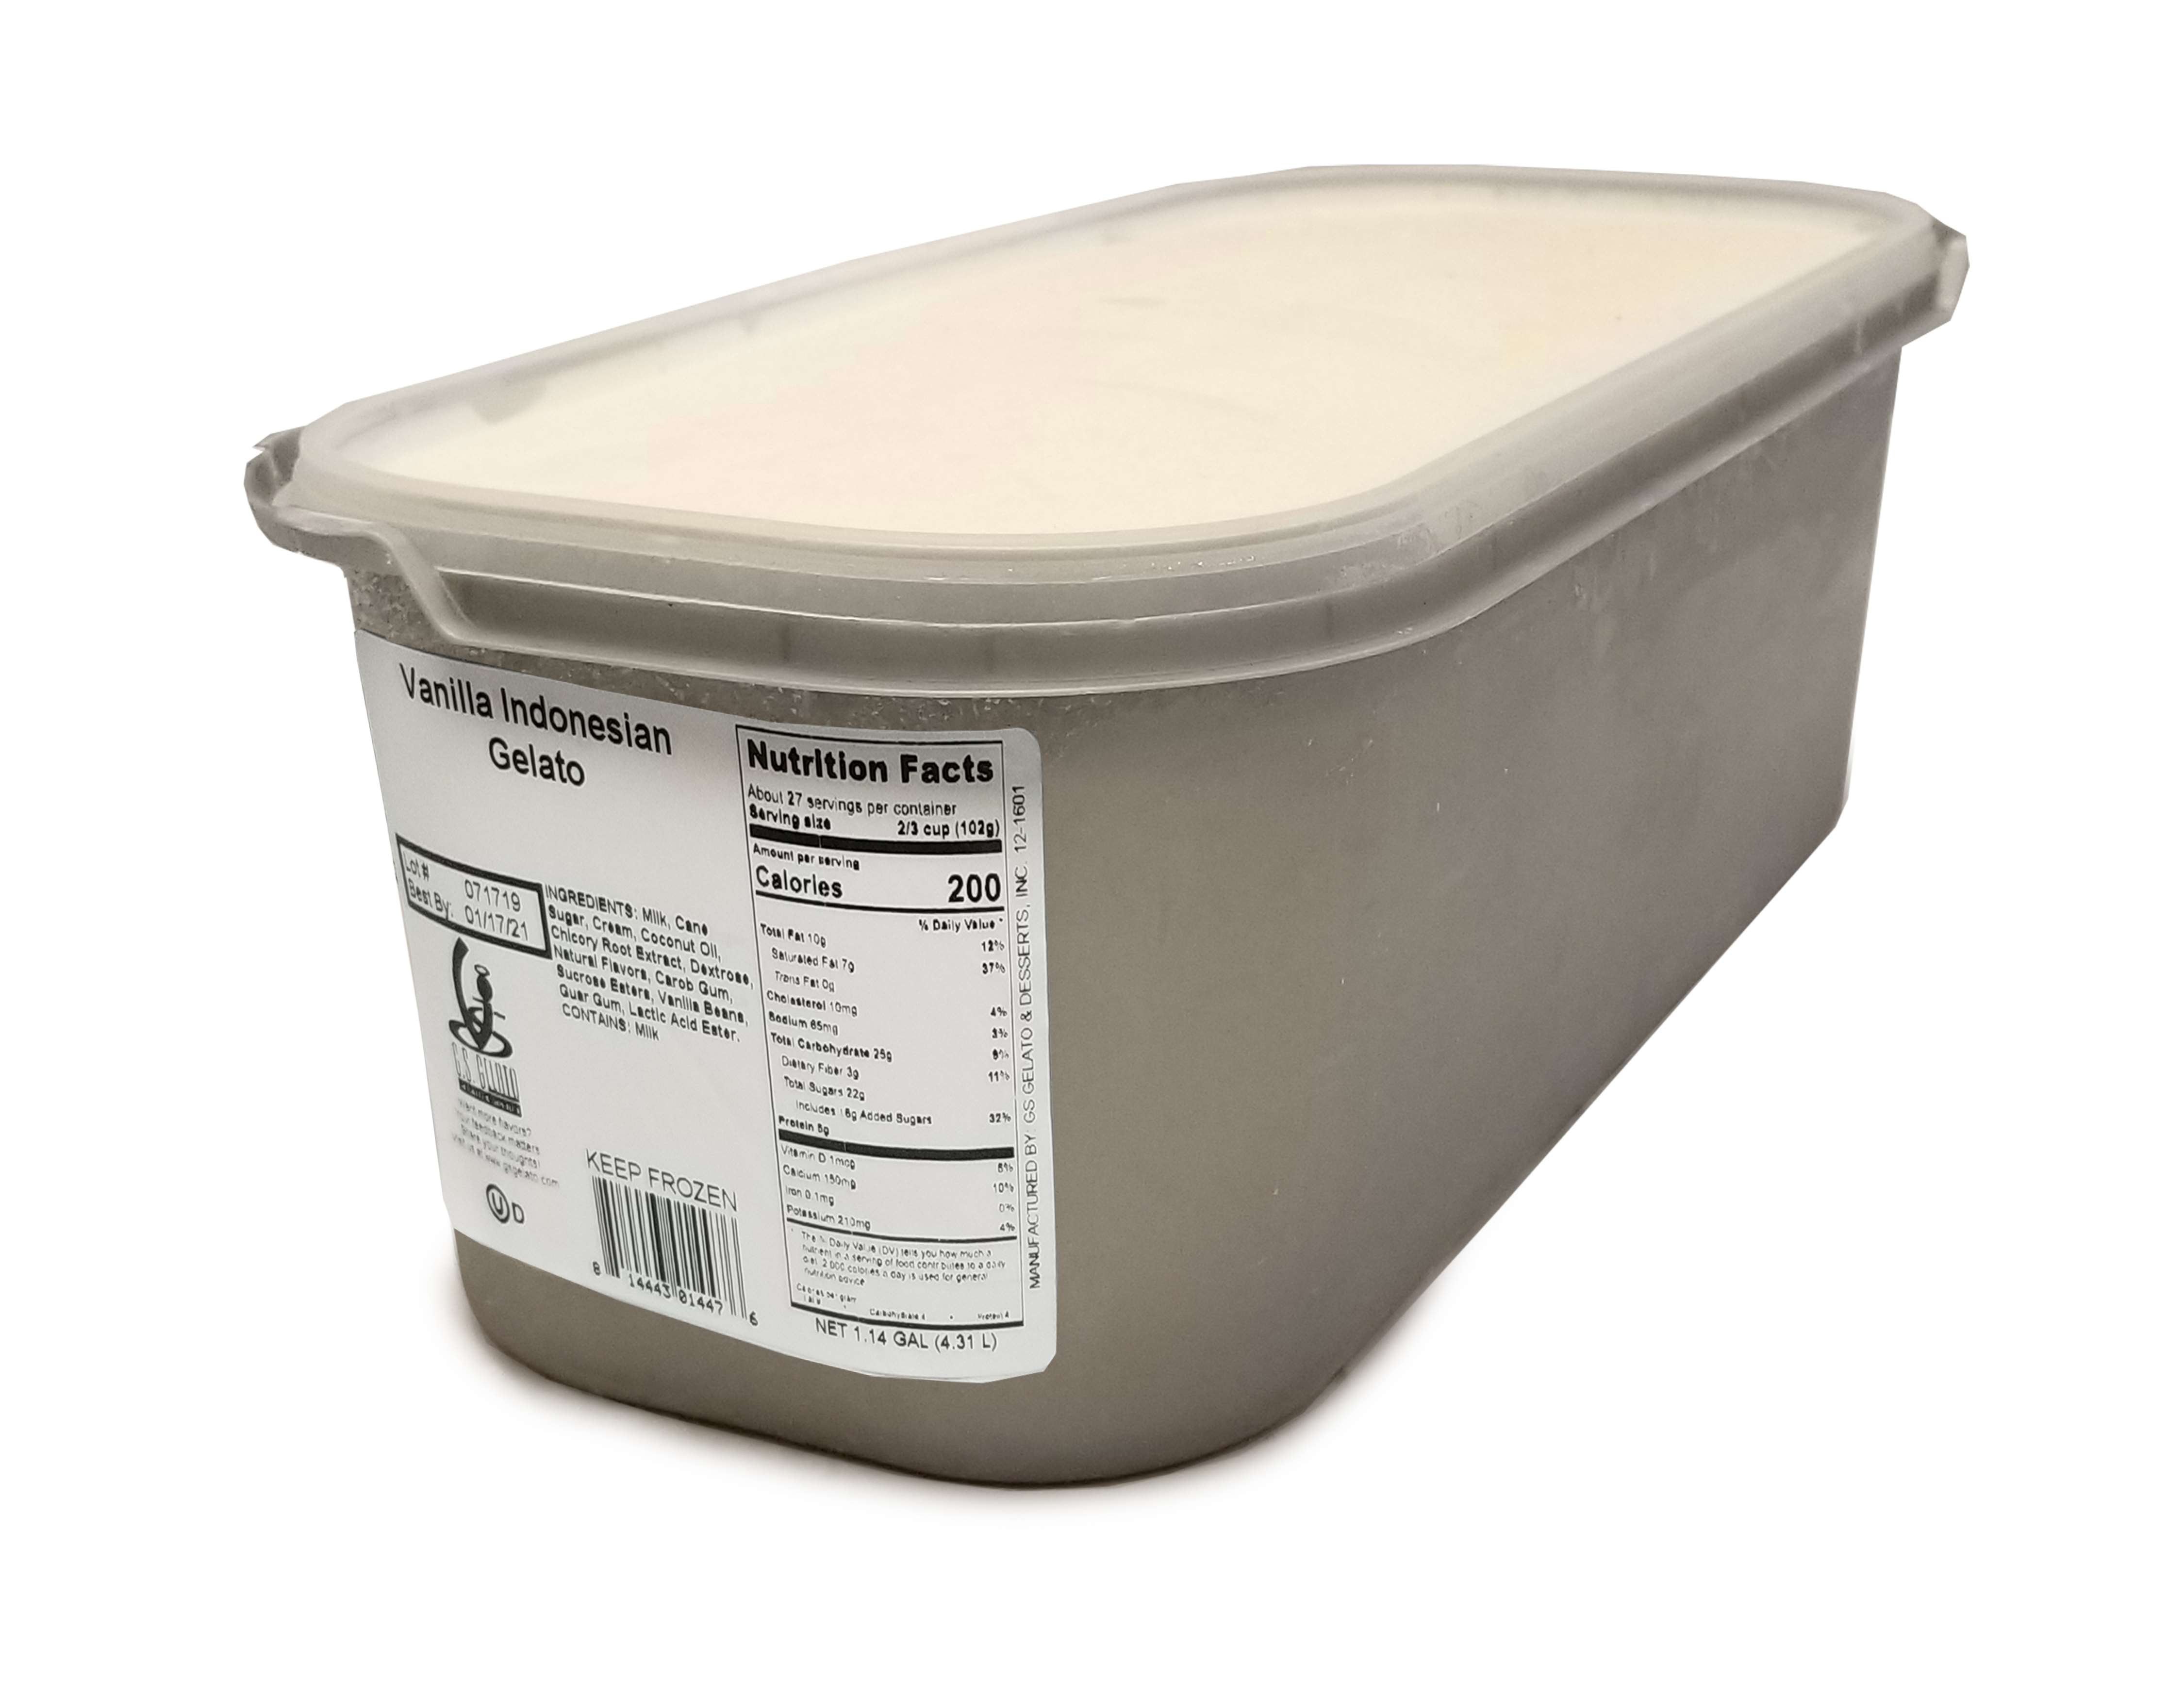 1 1/2 Gallon Plastic Ice Cream Tubs (Without Lids) - 10 Count